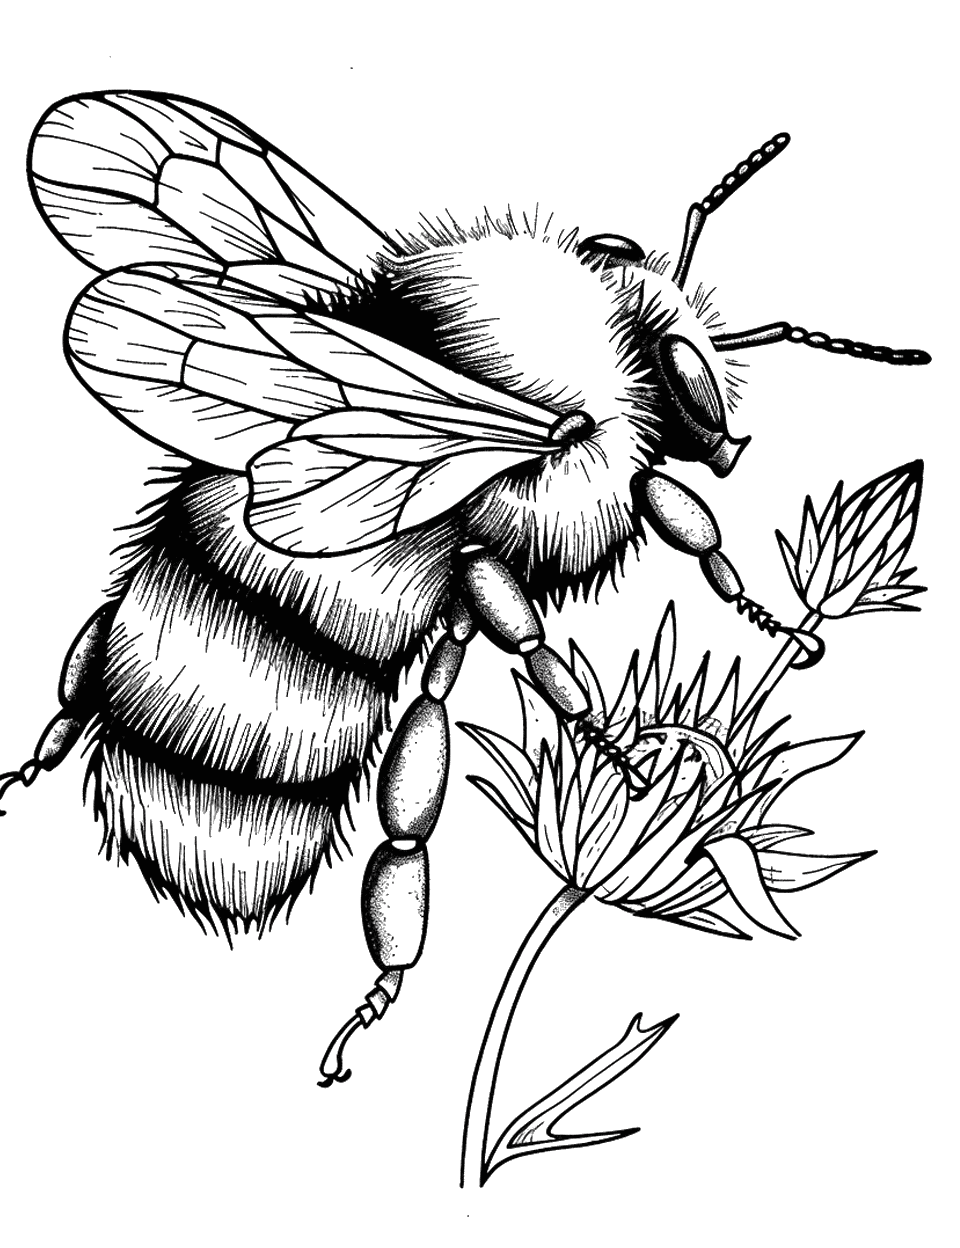 Fuzzy Bumble Bee on a Thistle Coloring Page - A fuzzy bumble bee clinging to the spiky bloom of a thistle.